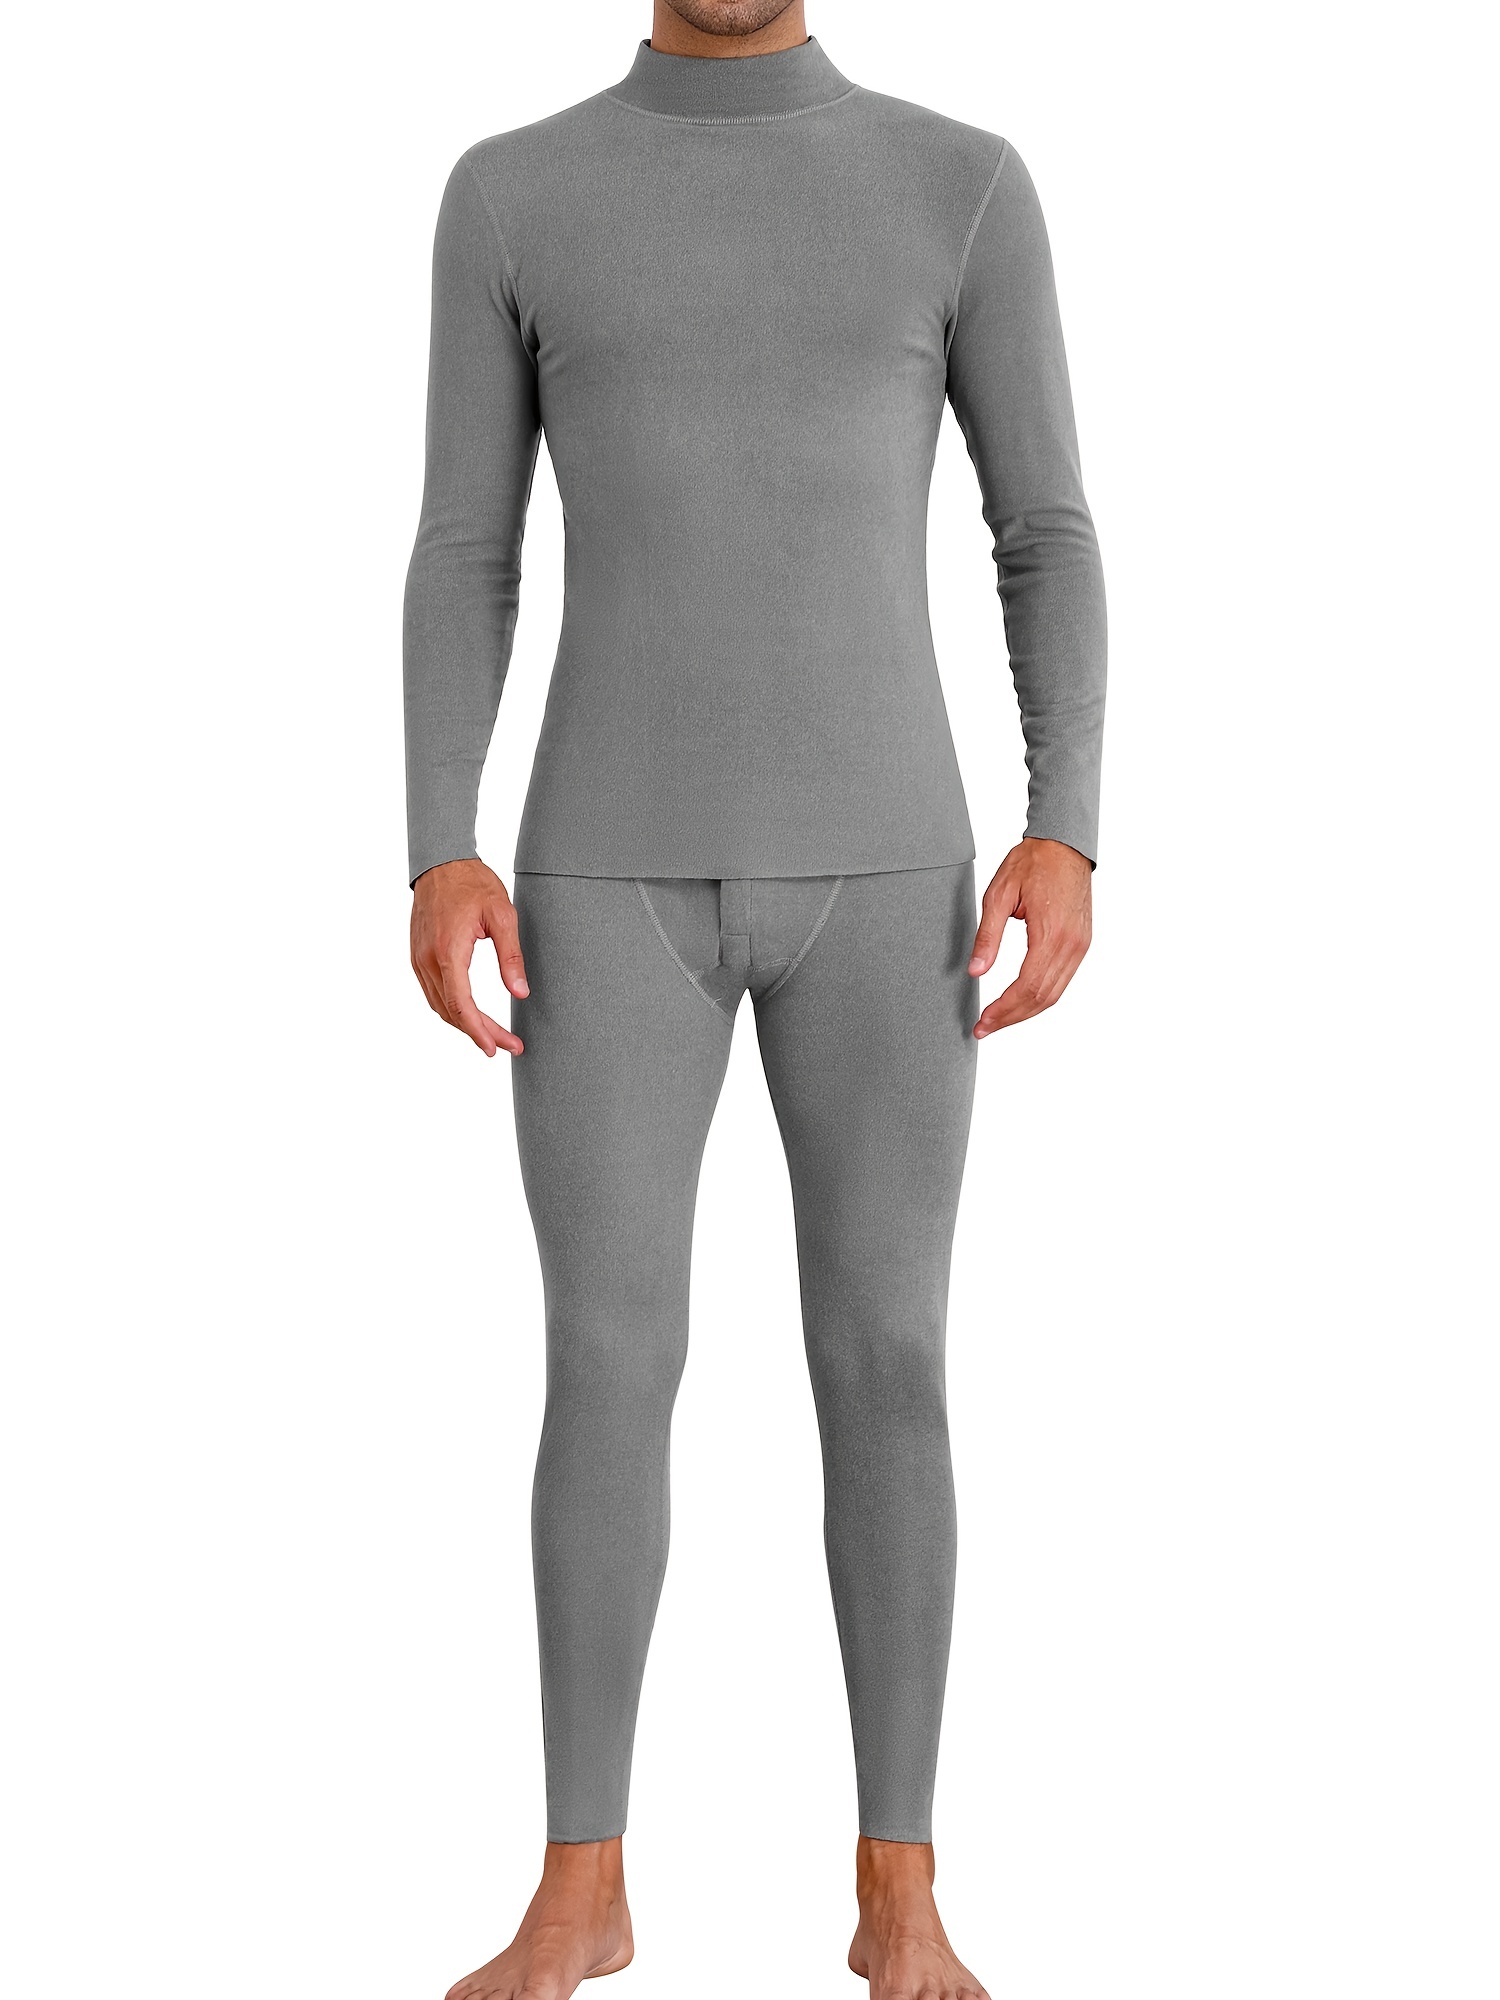 Mens Electric Heated Thermal Underwear Set Men's Winter Outdoor Sports  Underwear with Battery Pack